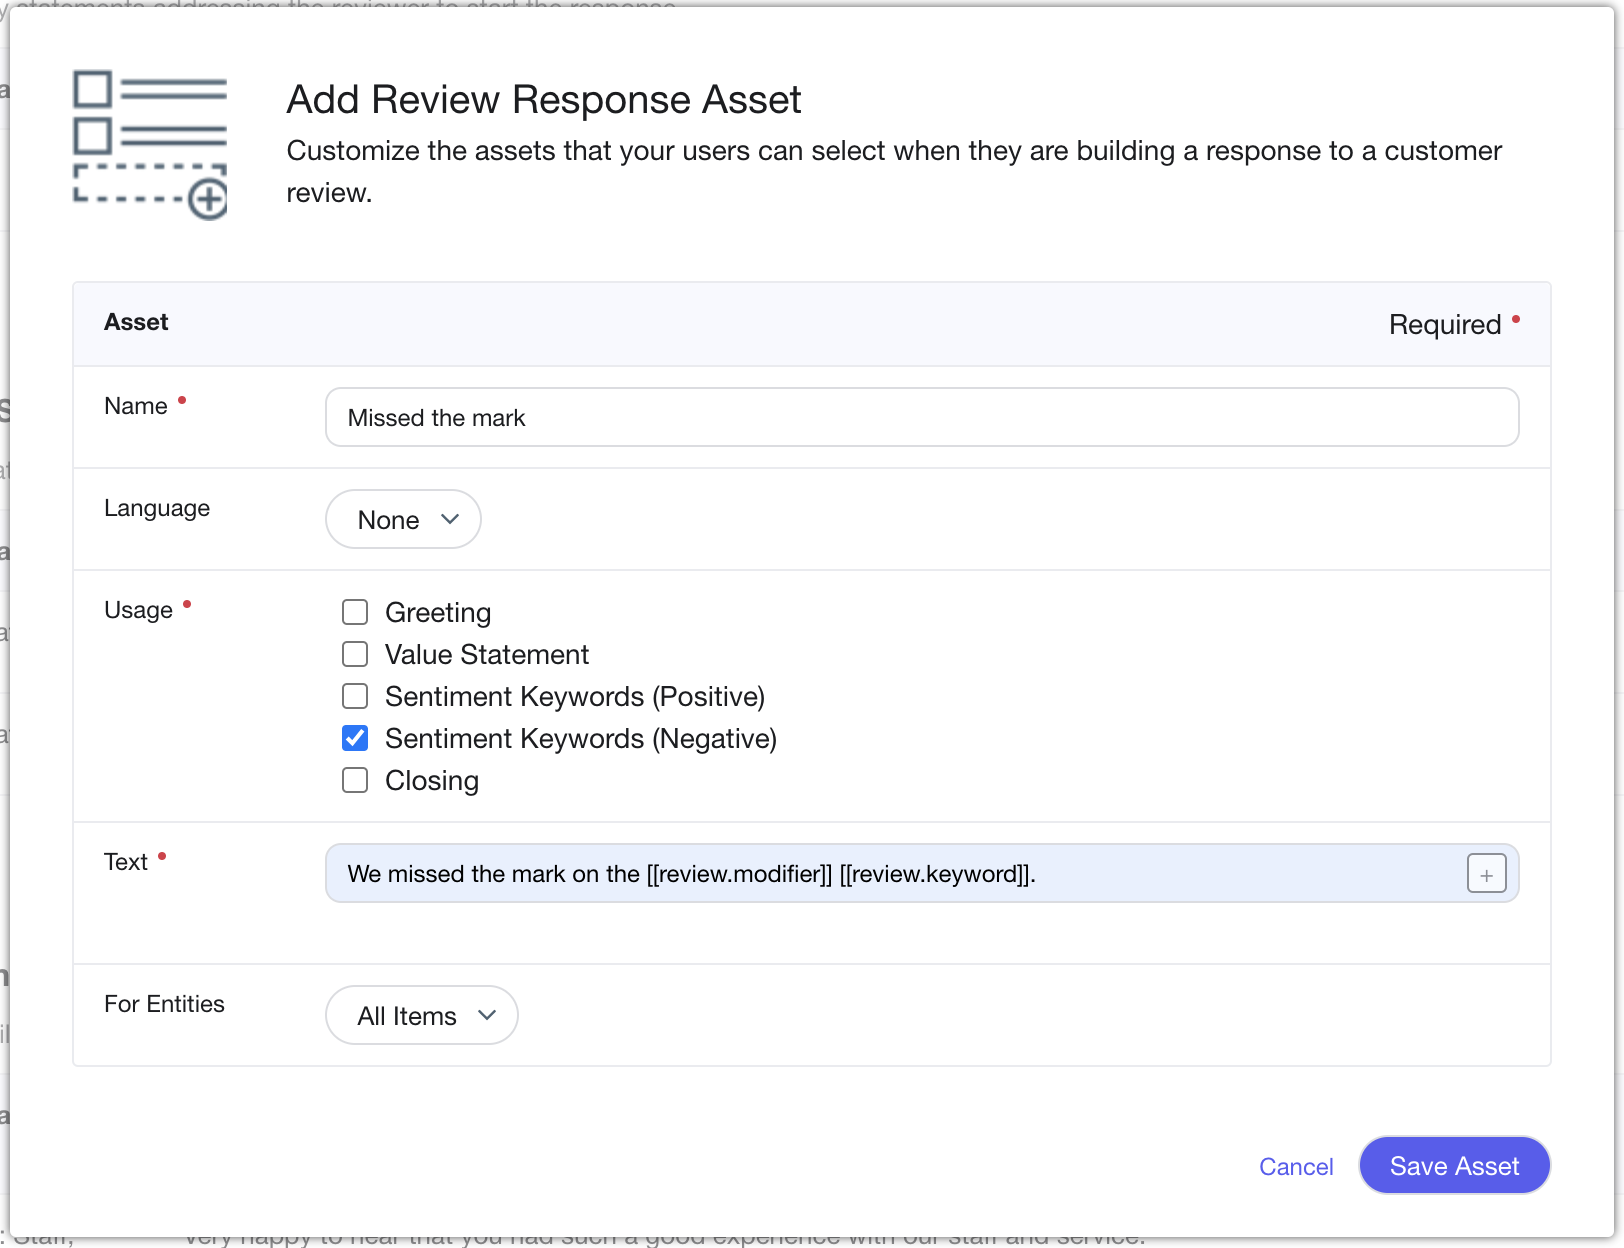 templated review response asset